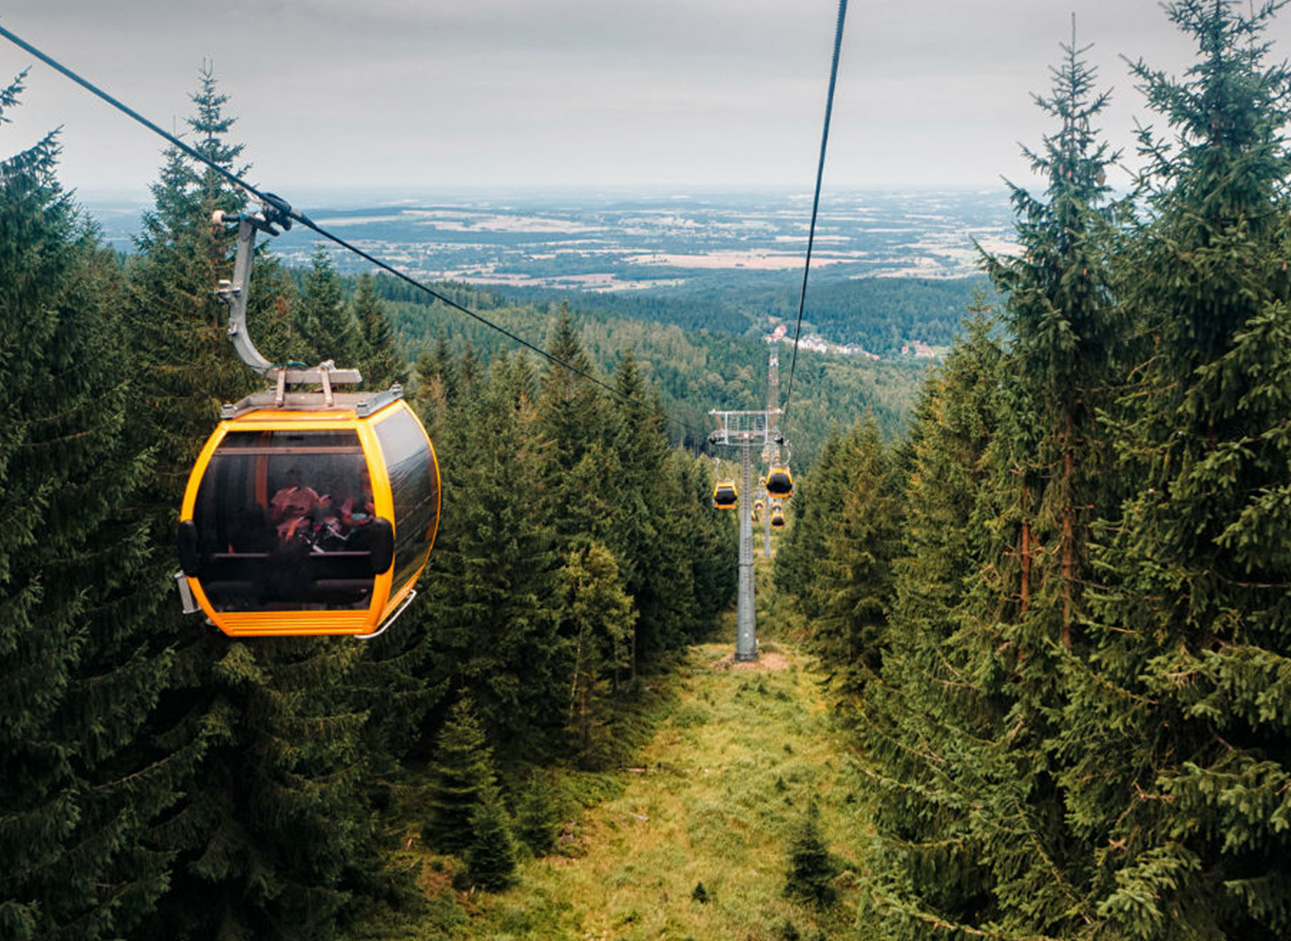 Ropeway Cable Car - Scenic views and convenient transportation